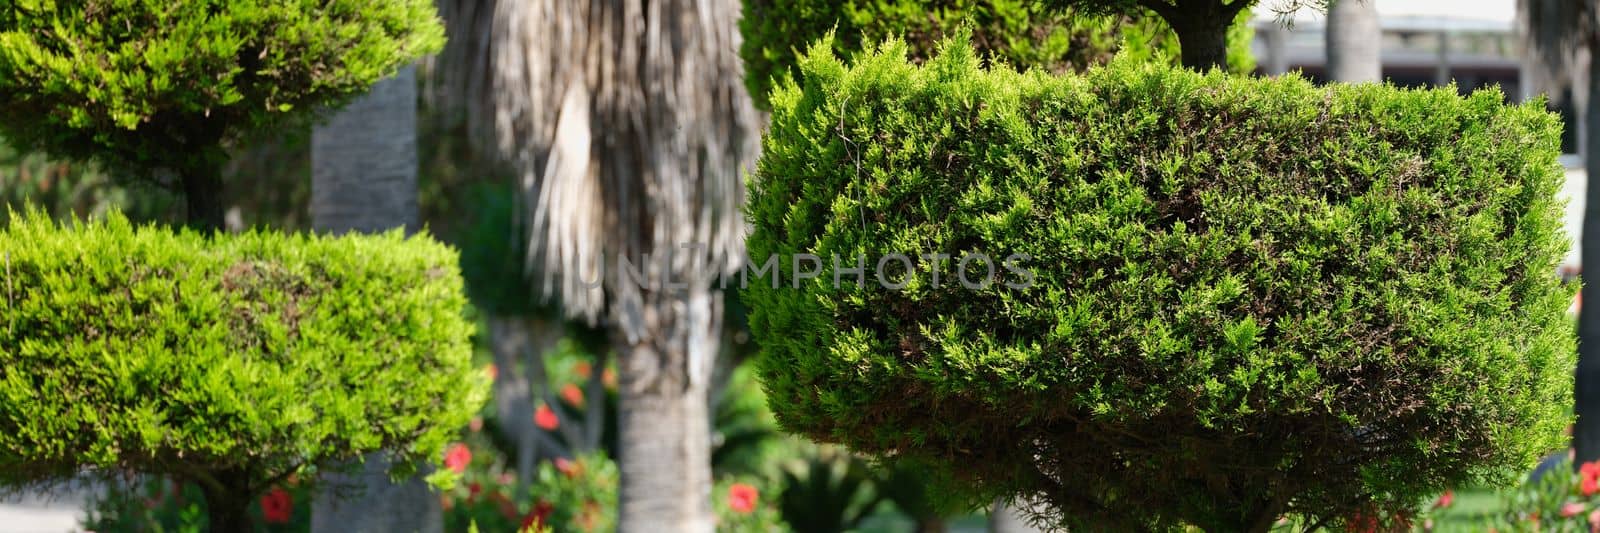 Trimmed evergreen thuja bushes in garden and green lawn in park by kuprevich